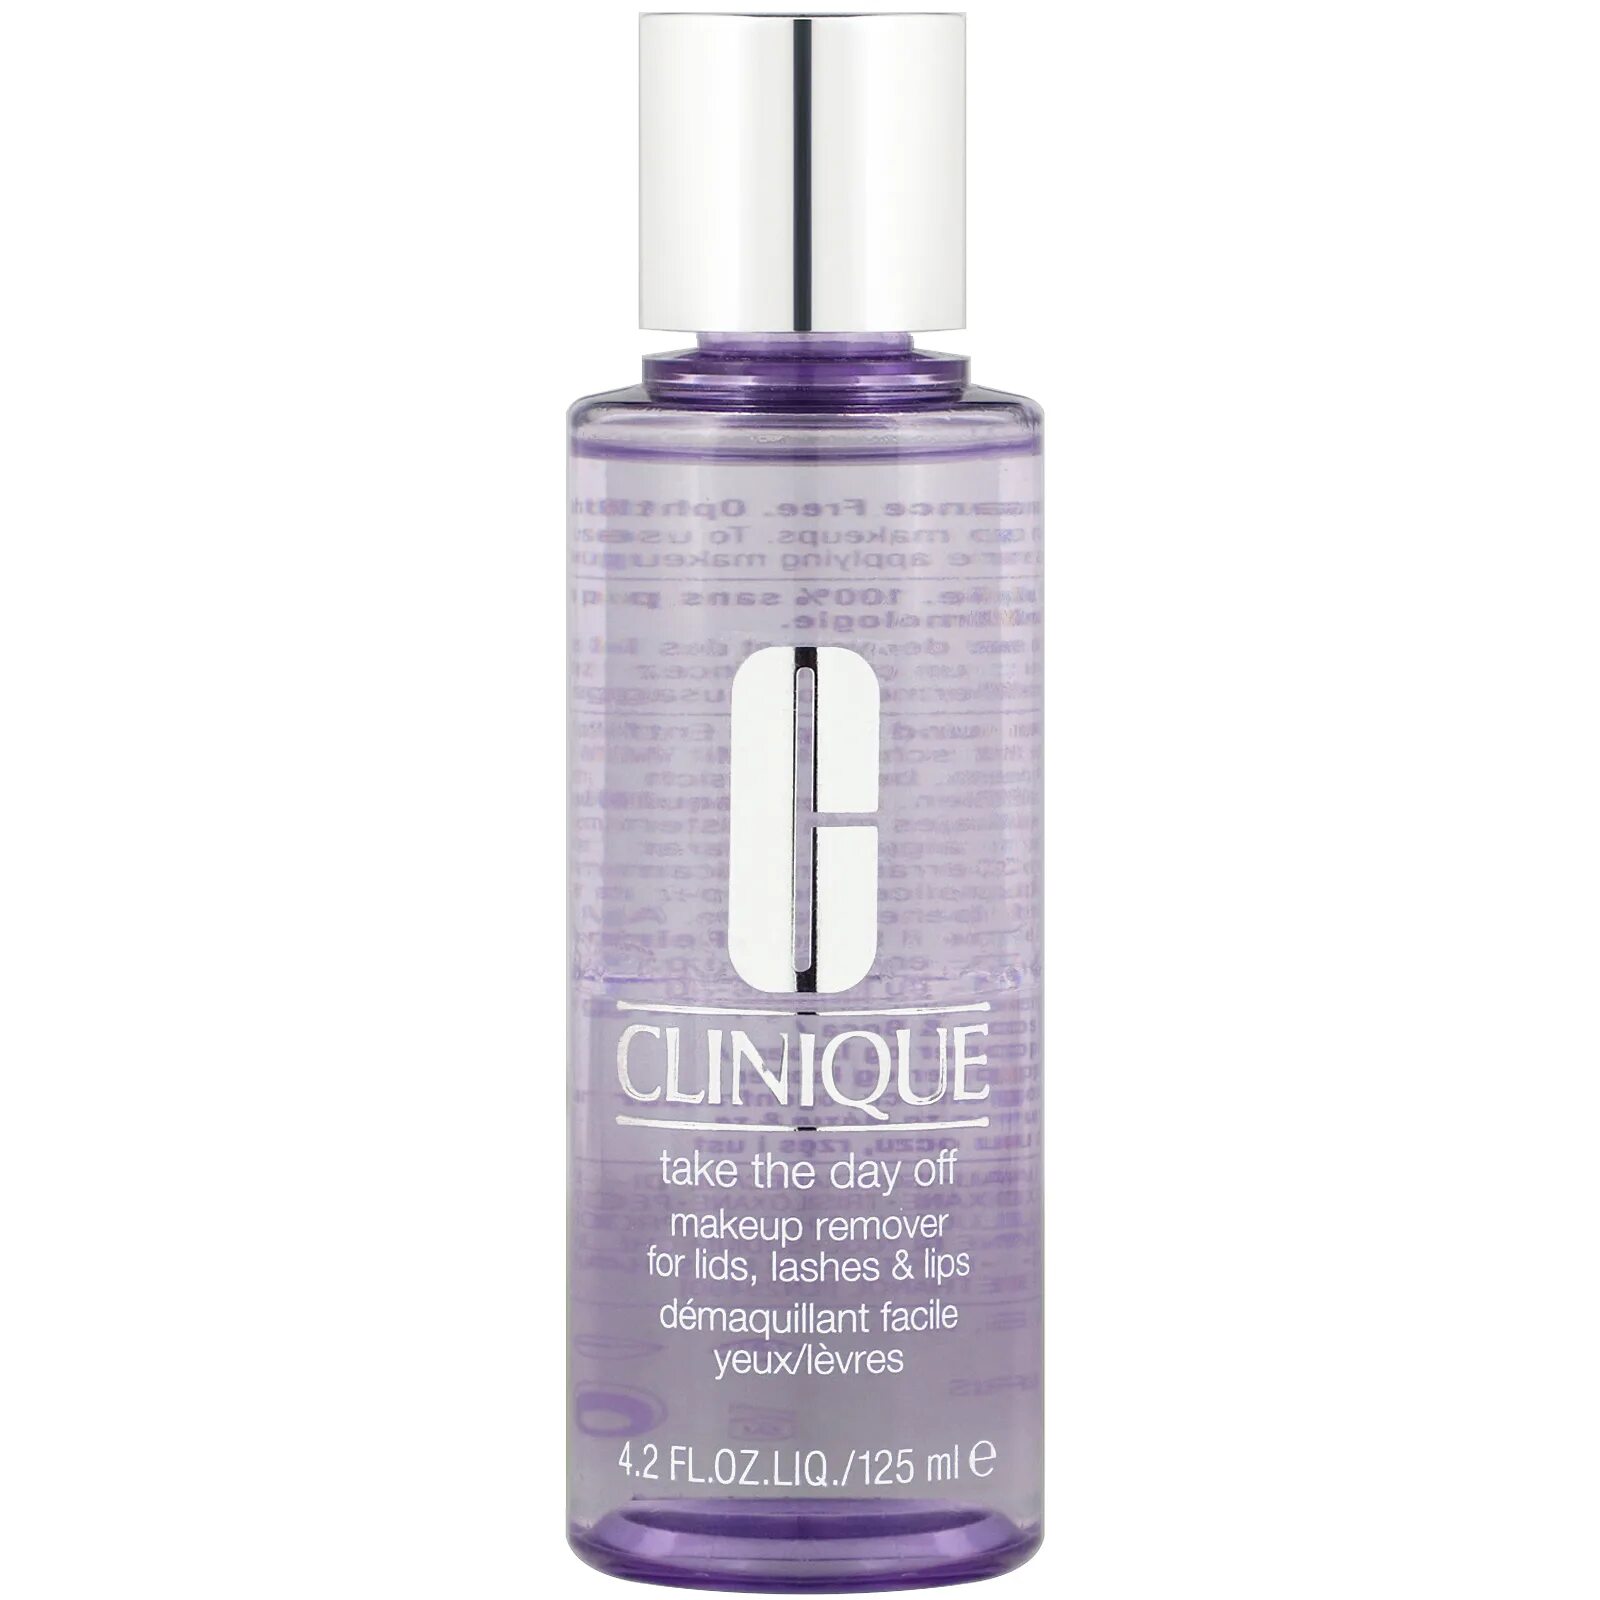 Clinique take the Day off Makeup Remover for Lids Lashes. Clinique take the Day off Makeup Remover. Clinique средство для снятия стойкого макияжа take the Day off, 50 мл. Take the Day off Makeup Remover for Lids, Lashes & Lips.